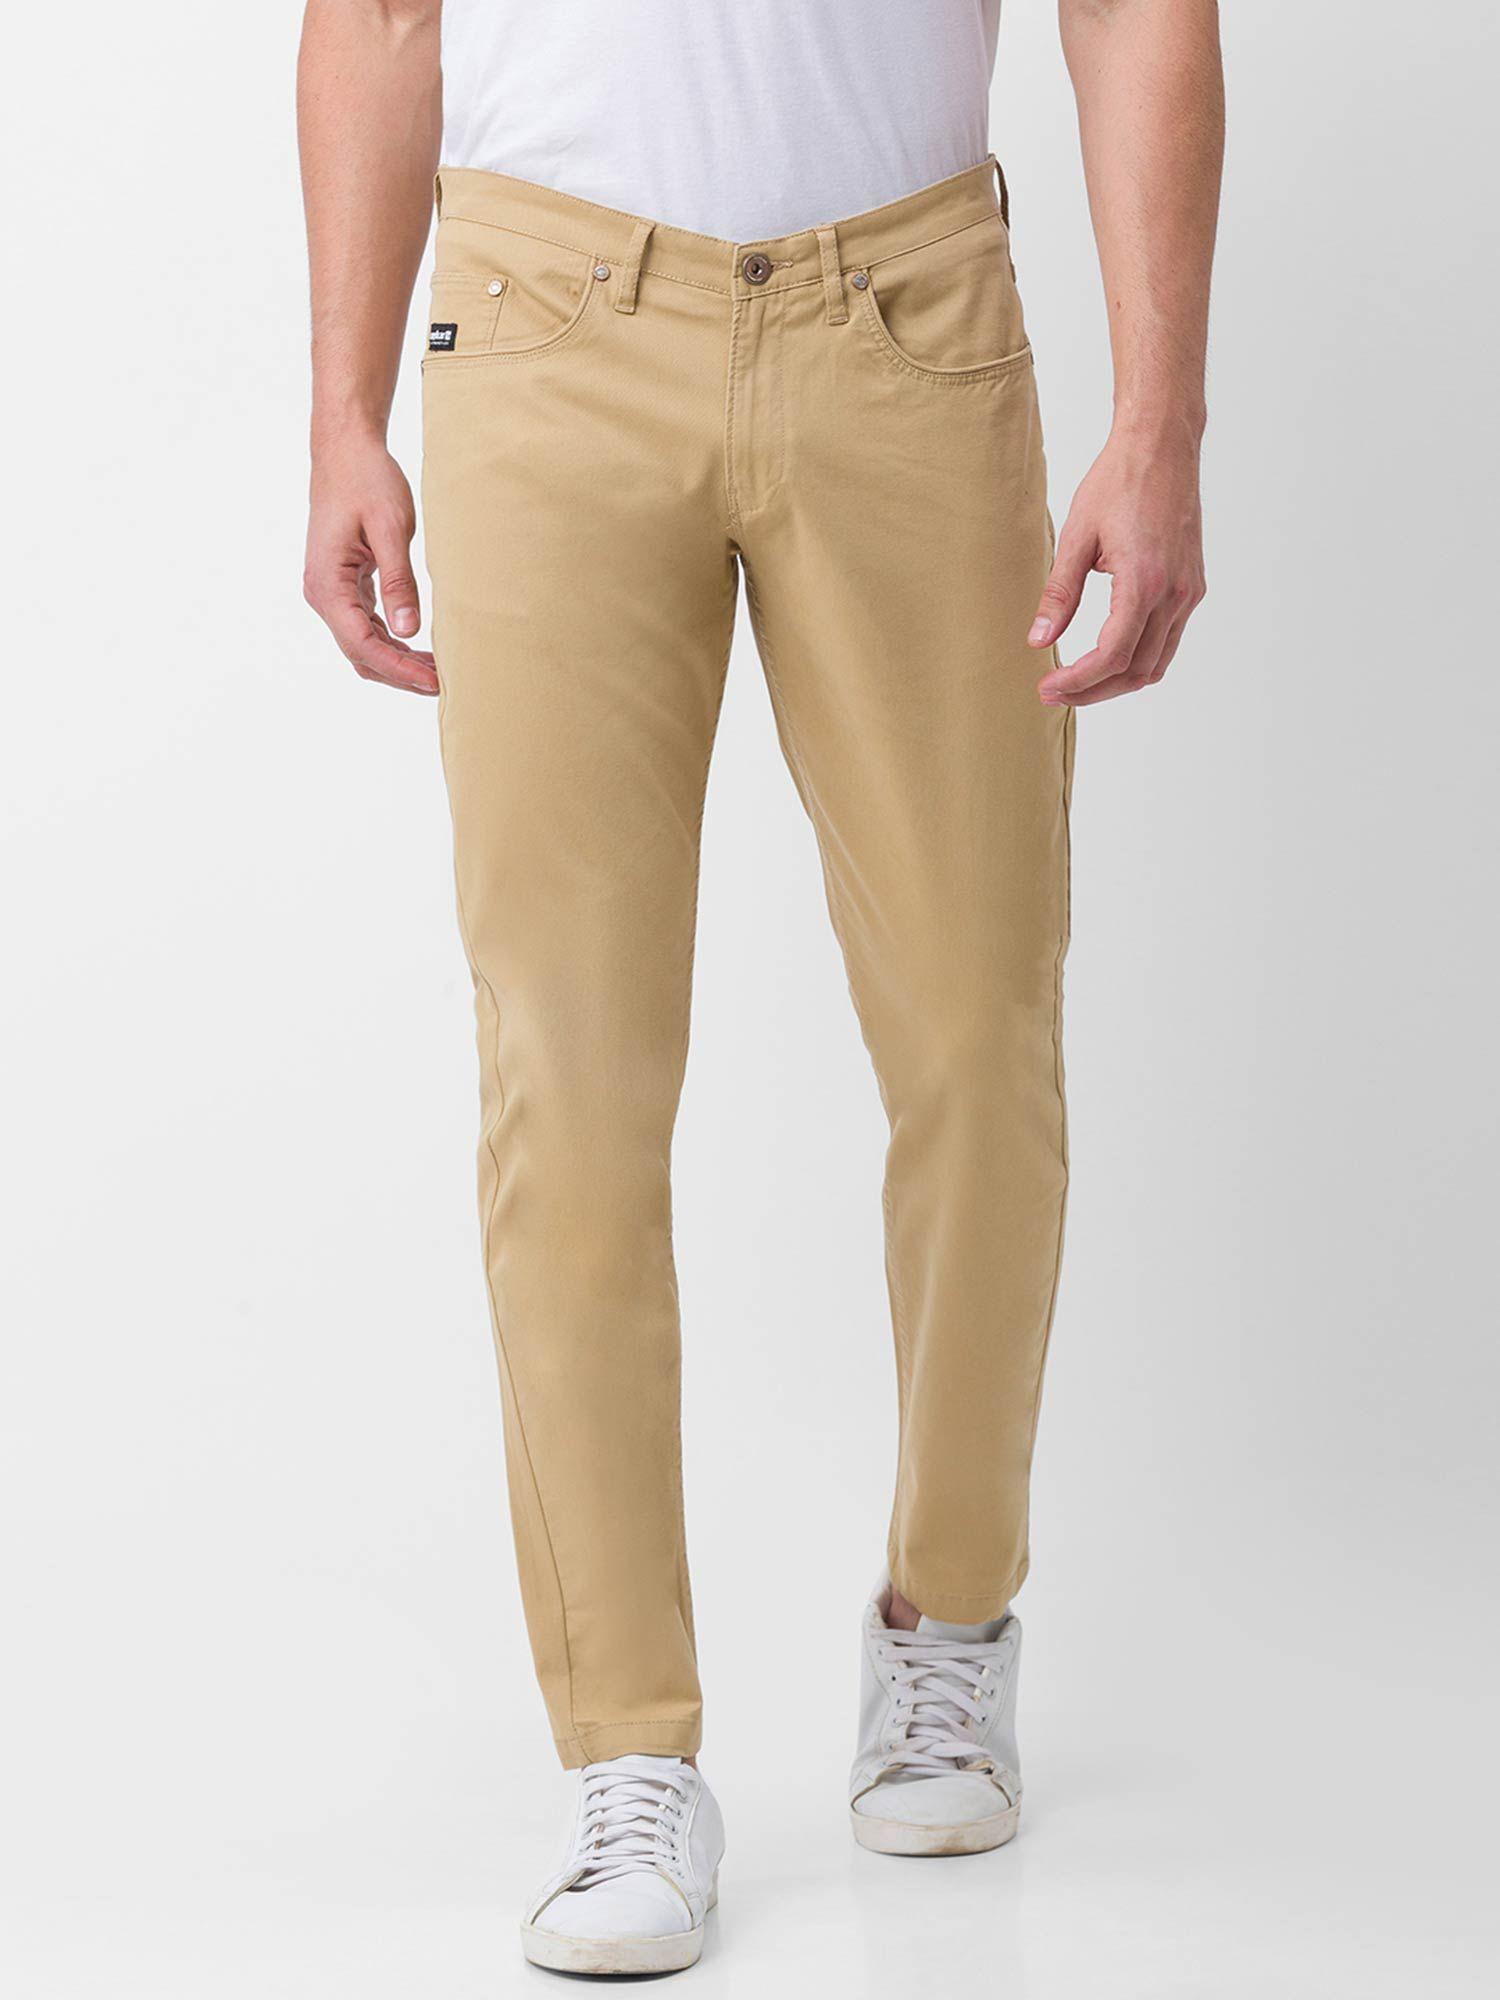 sand-khaki-cotton-slim-fit-tapered-length-trousers-for-men